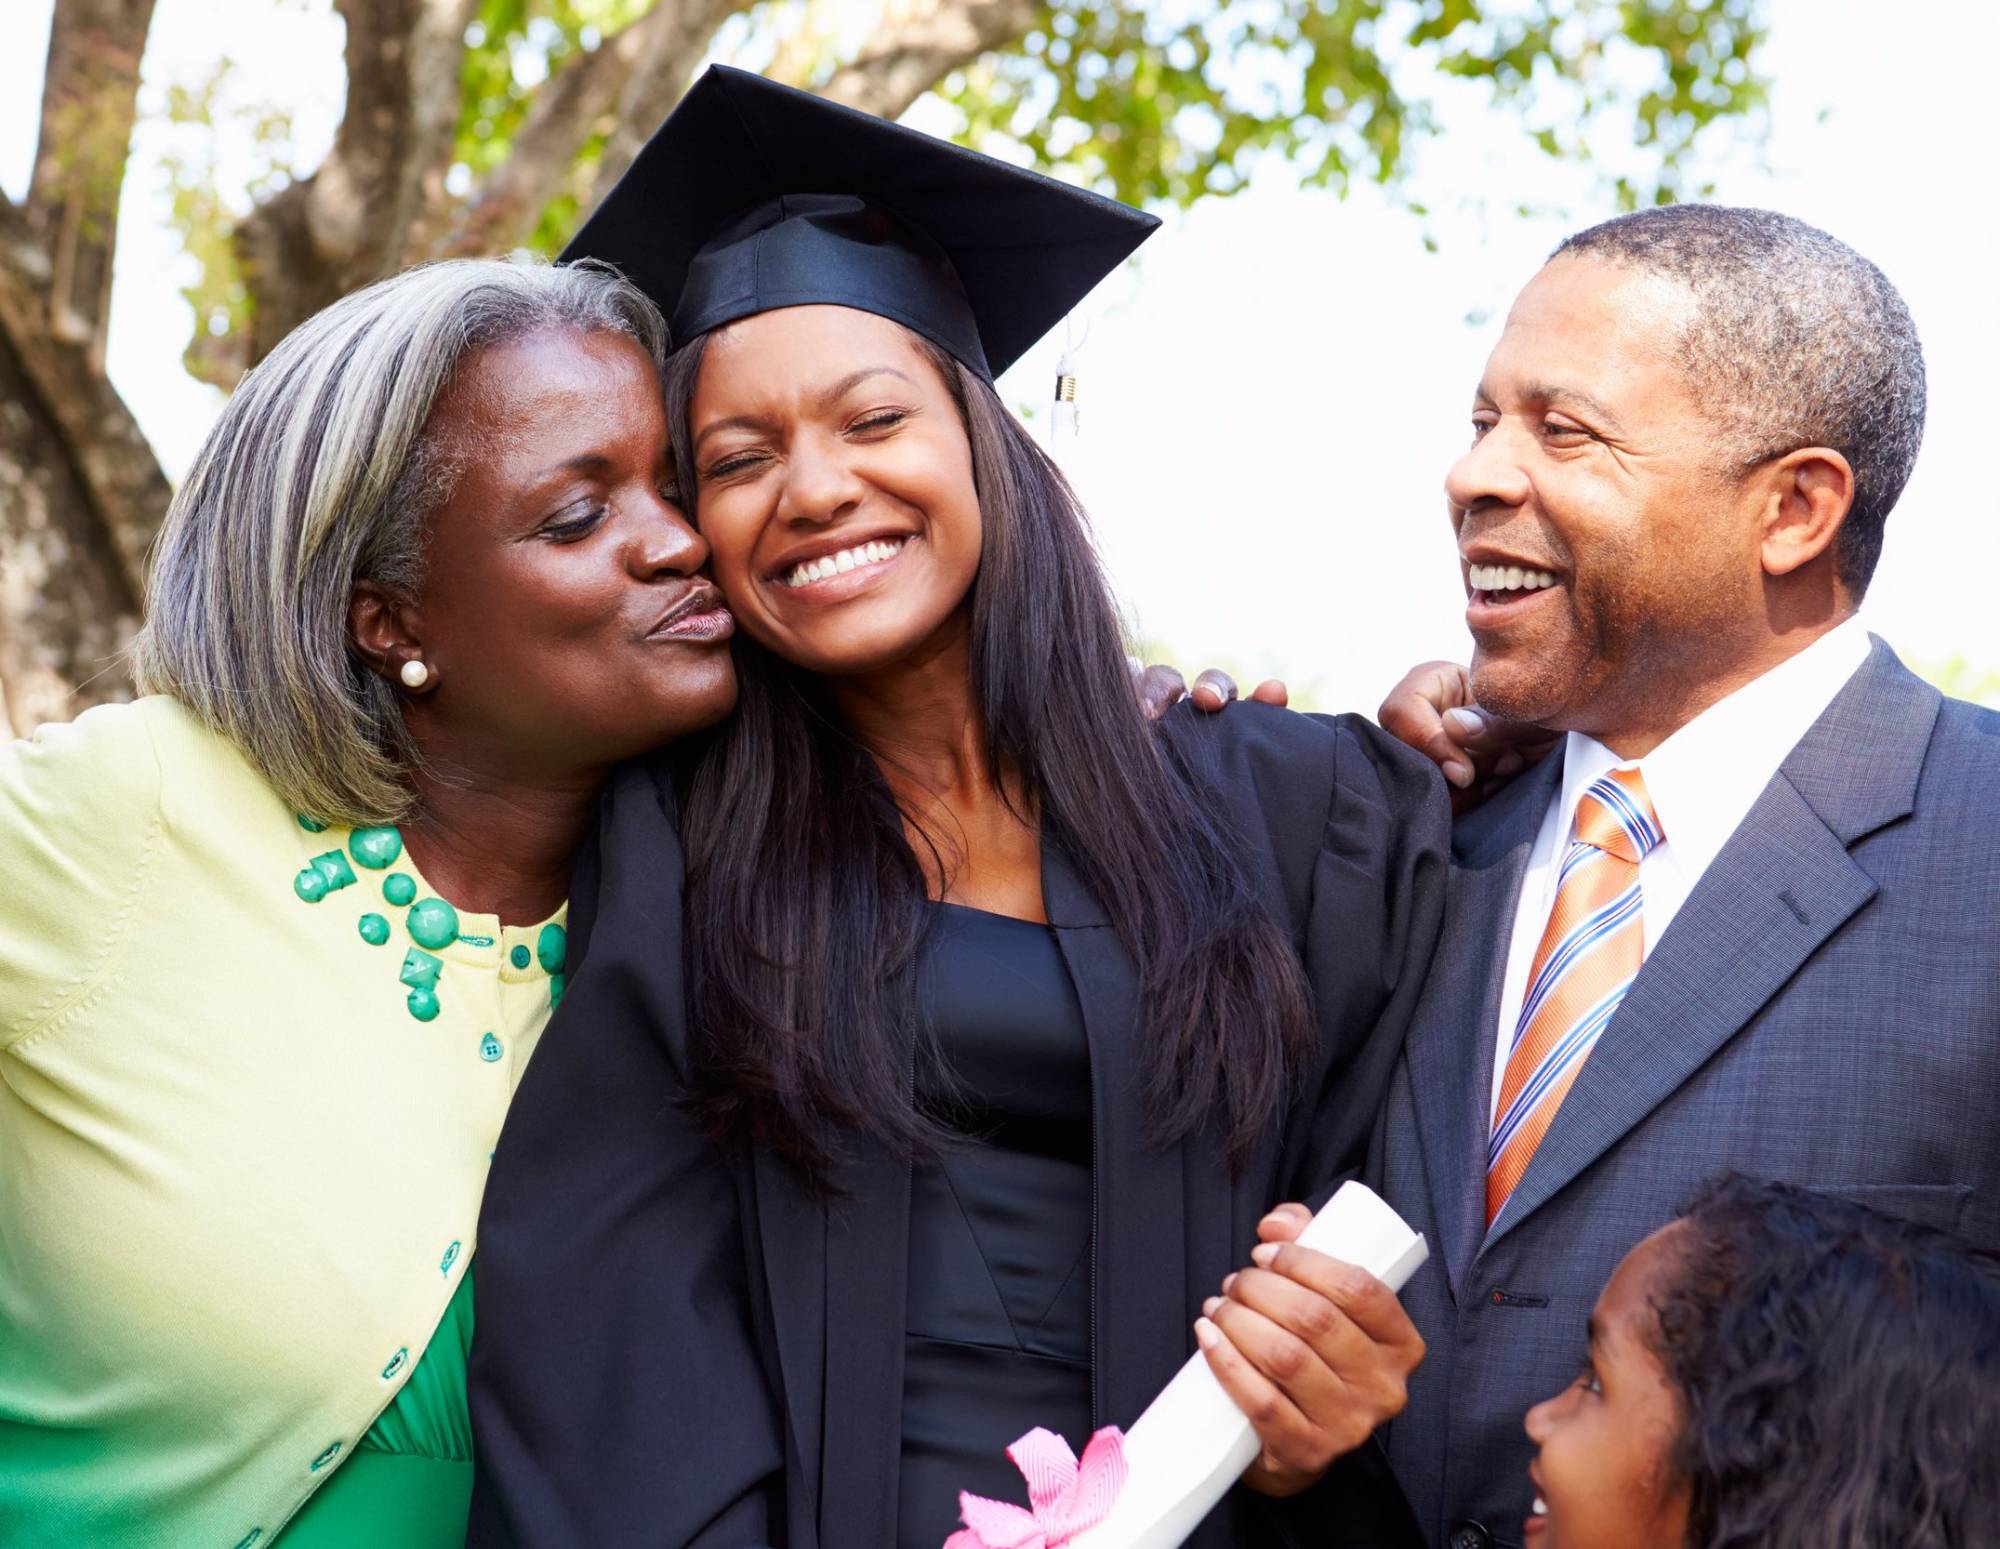 High school graduate celebrates with her parents